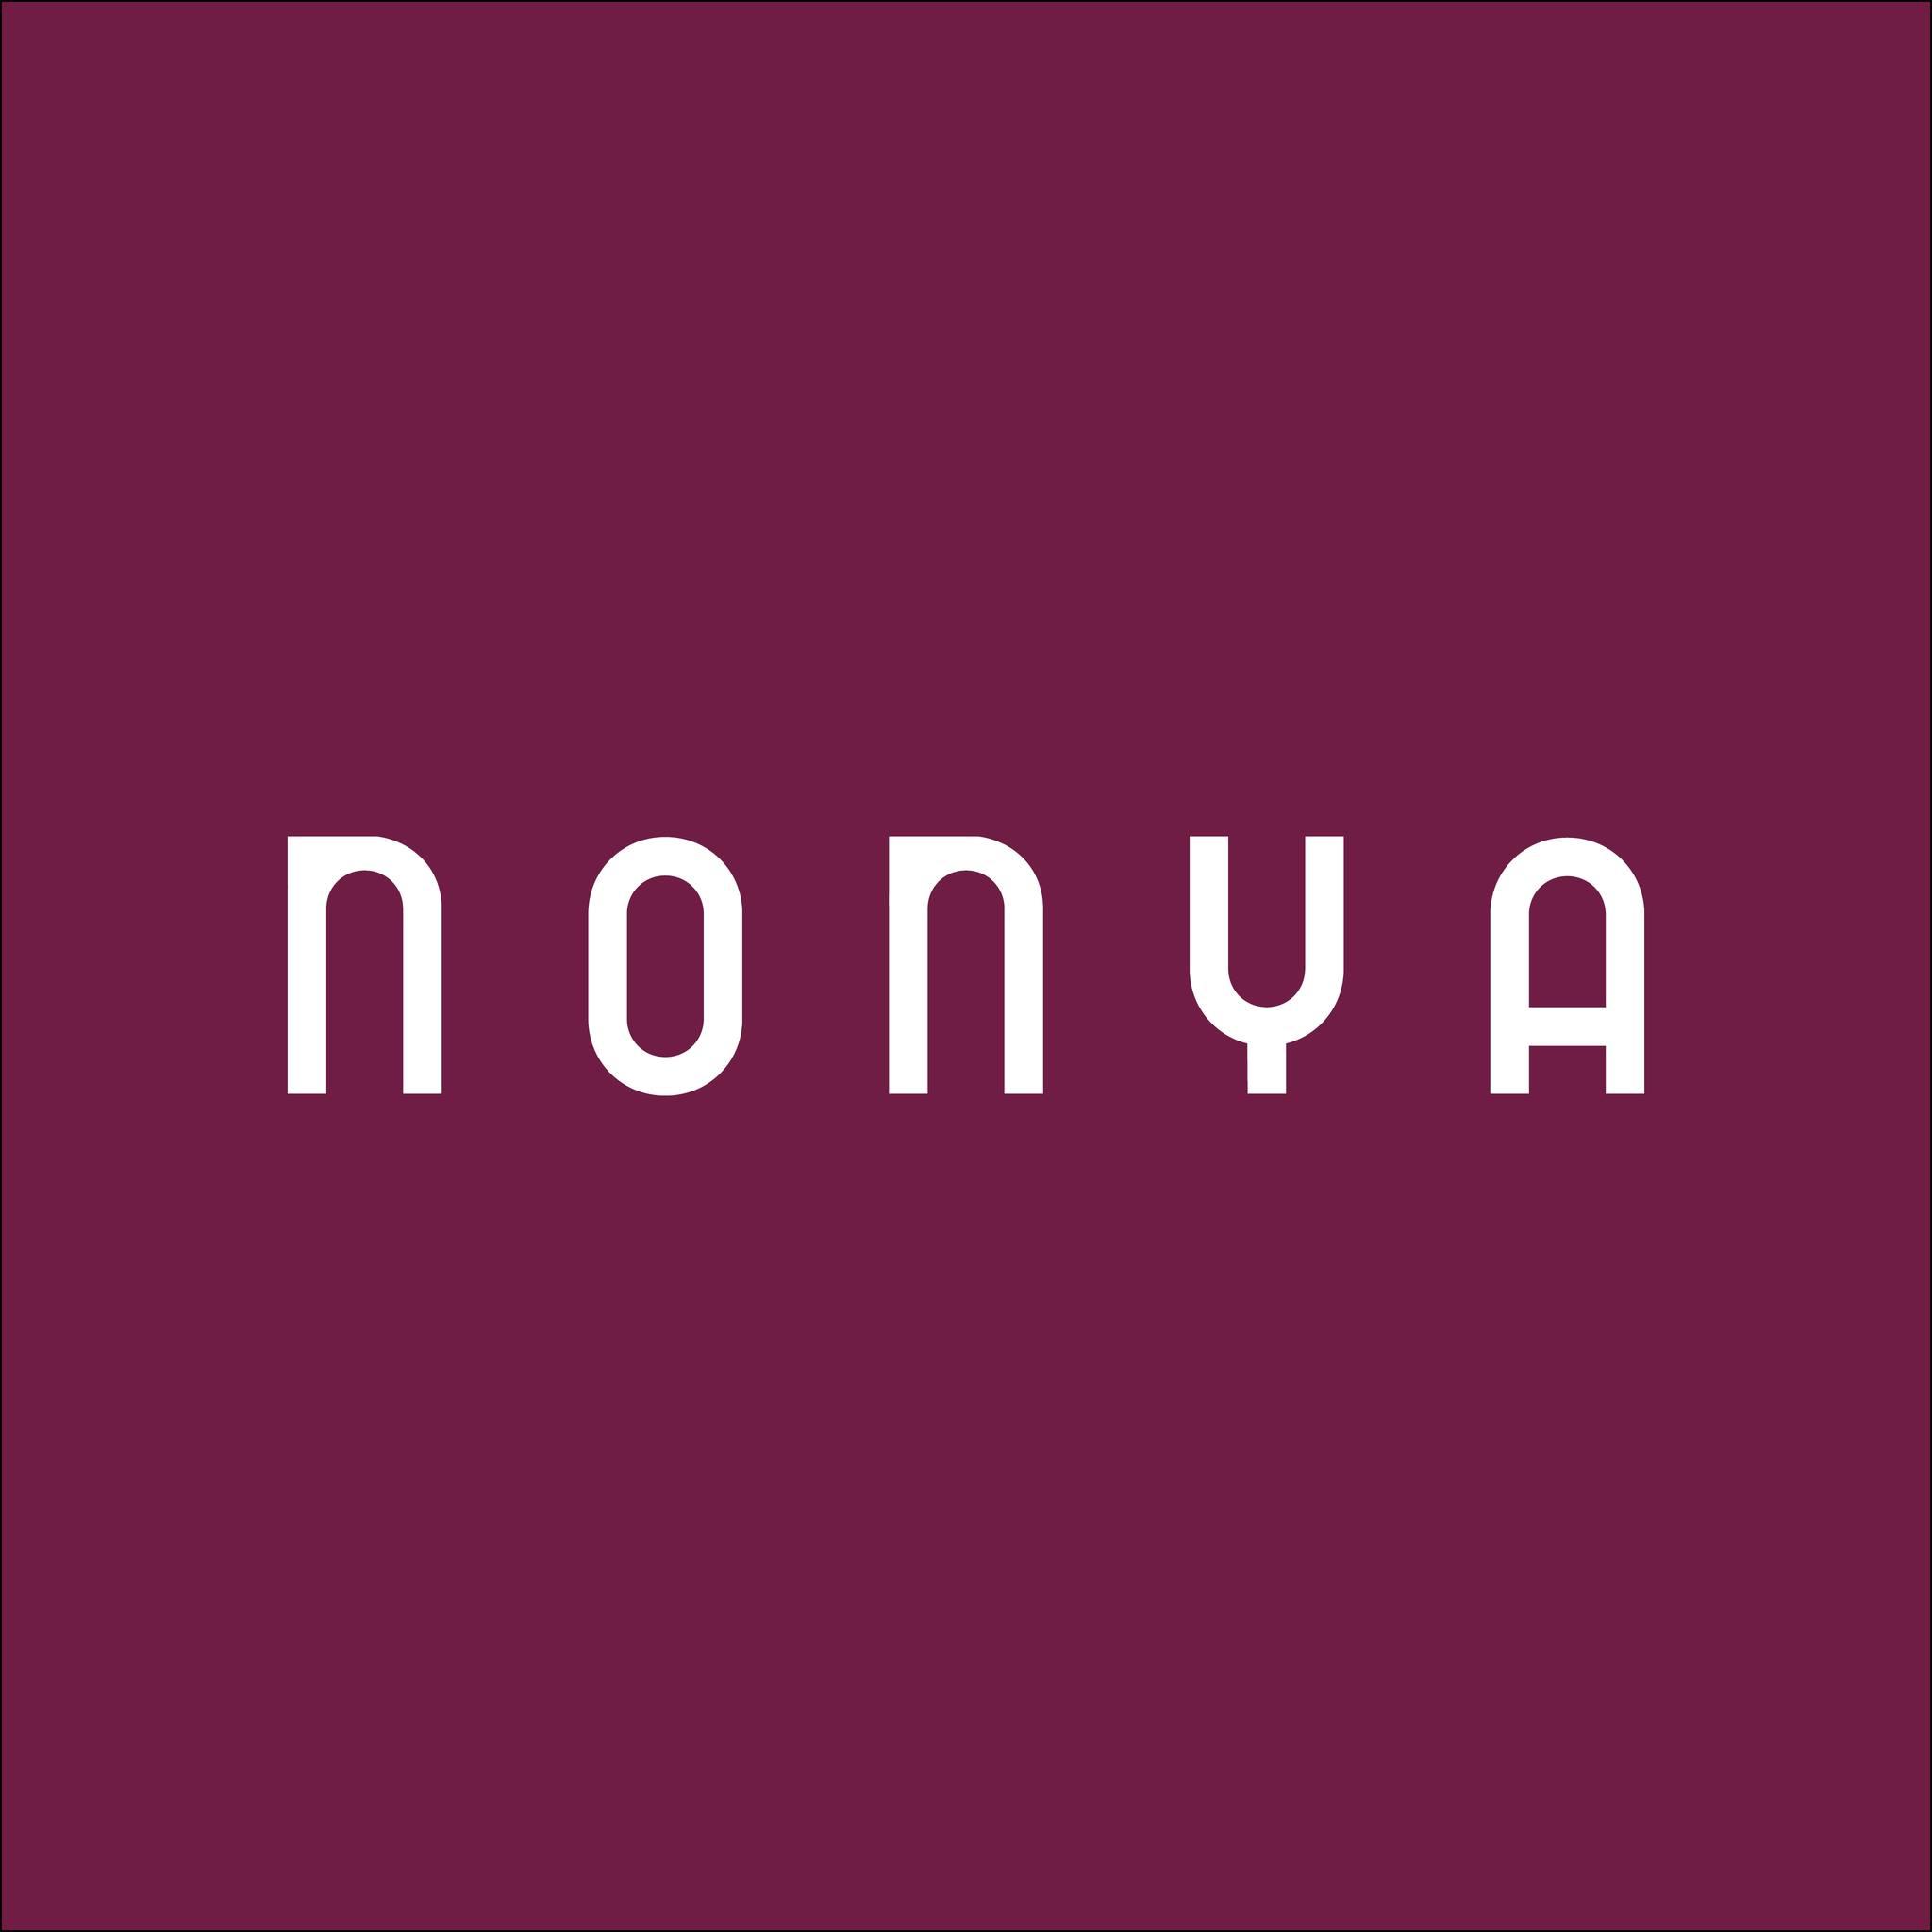 New Year’s Eve Party at Nonya